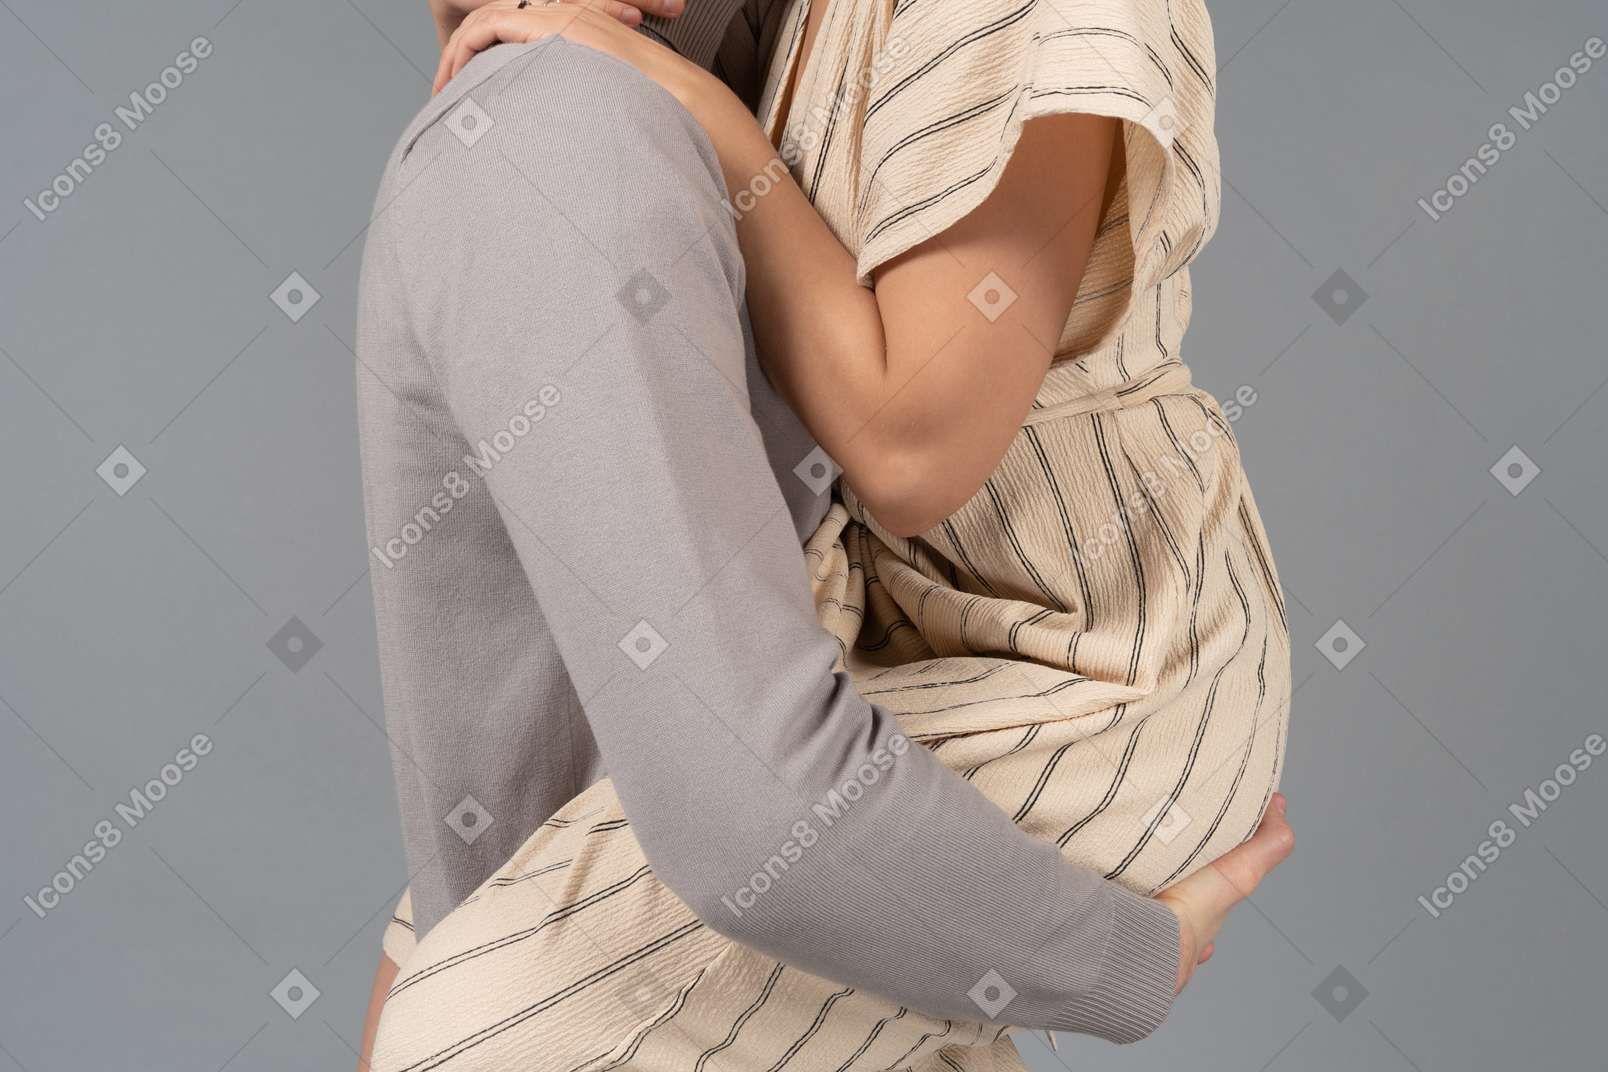 Man holding his girlfriend in his arms